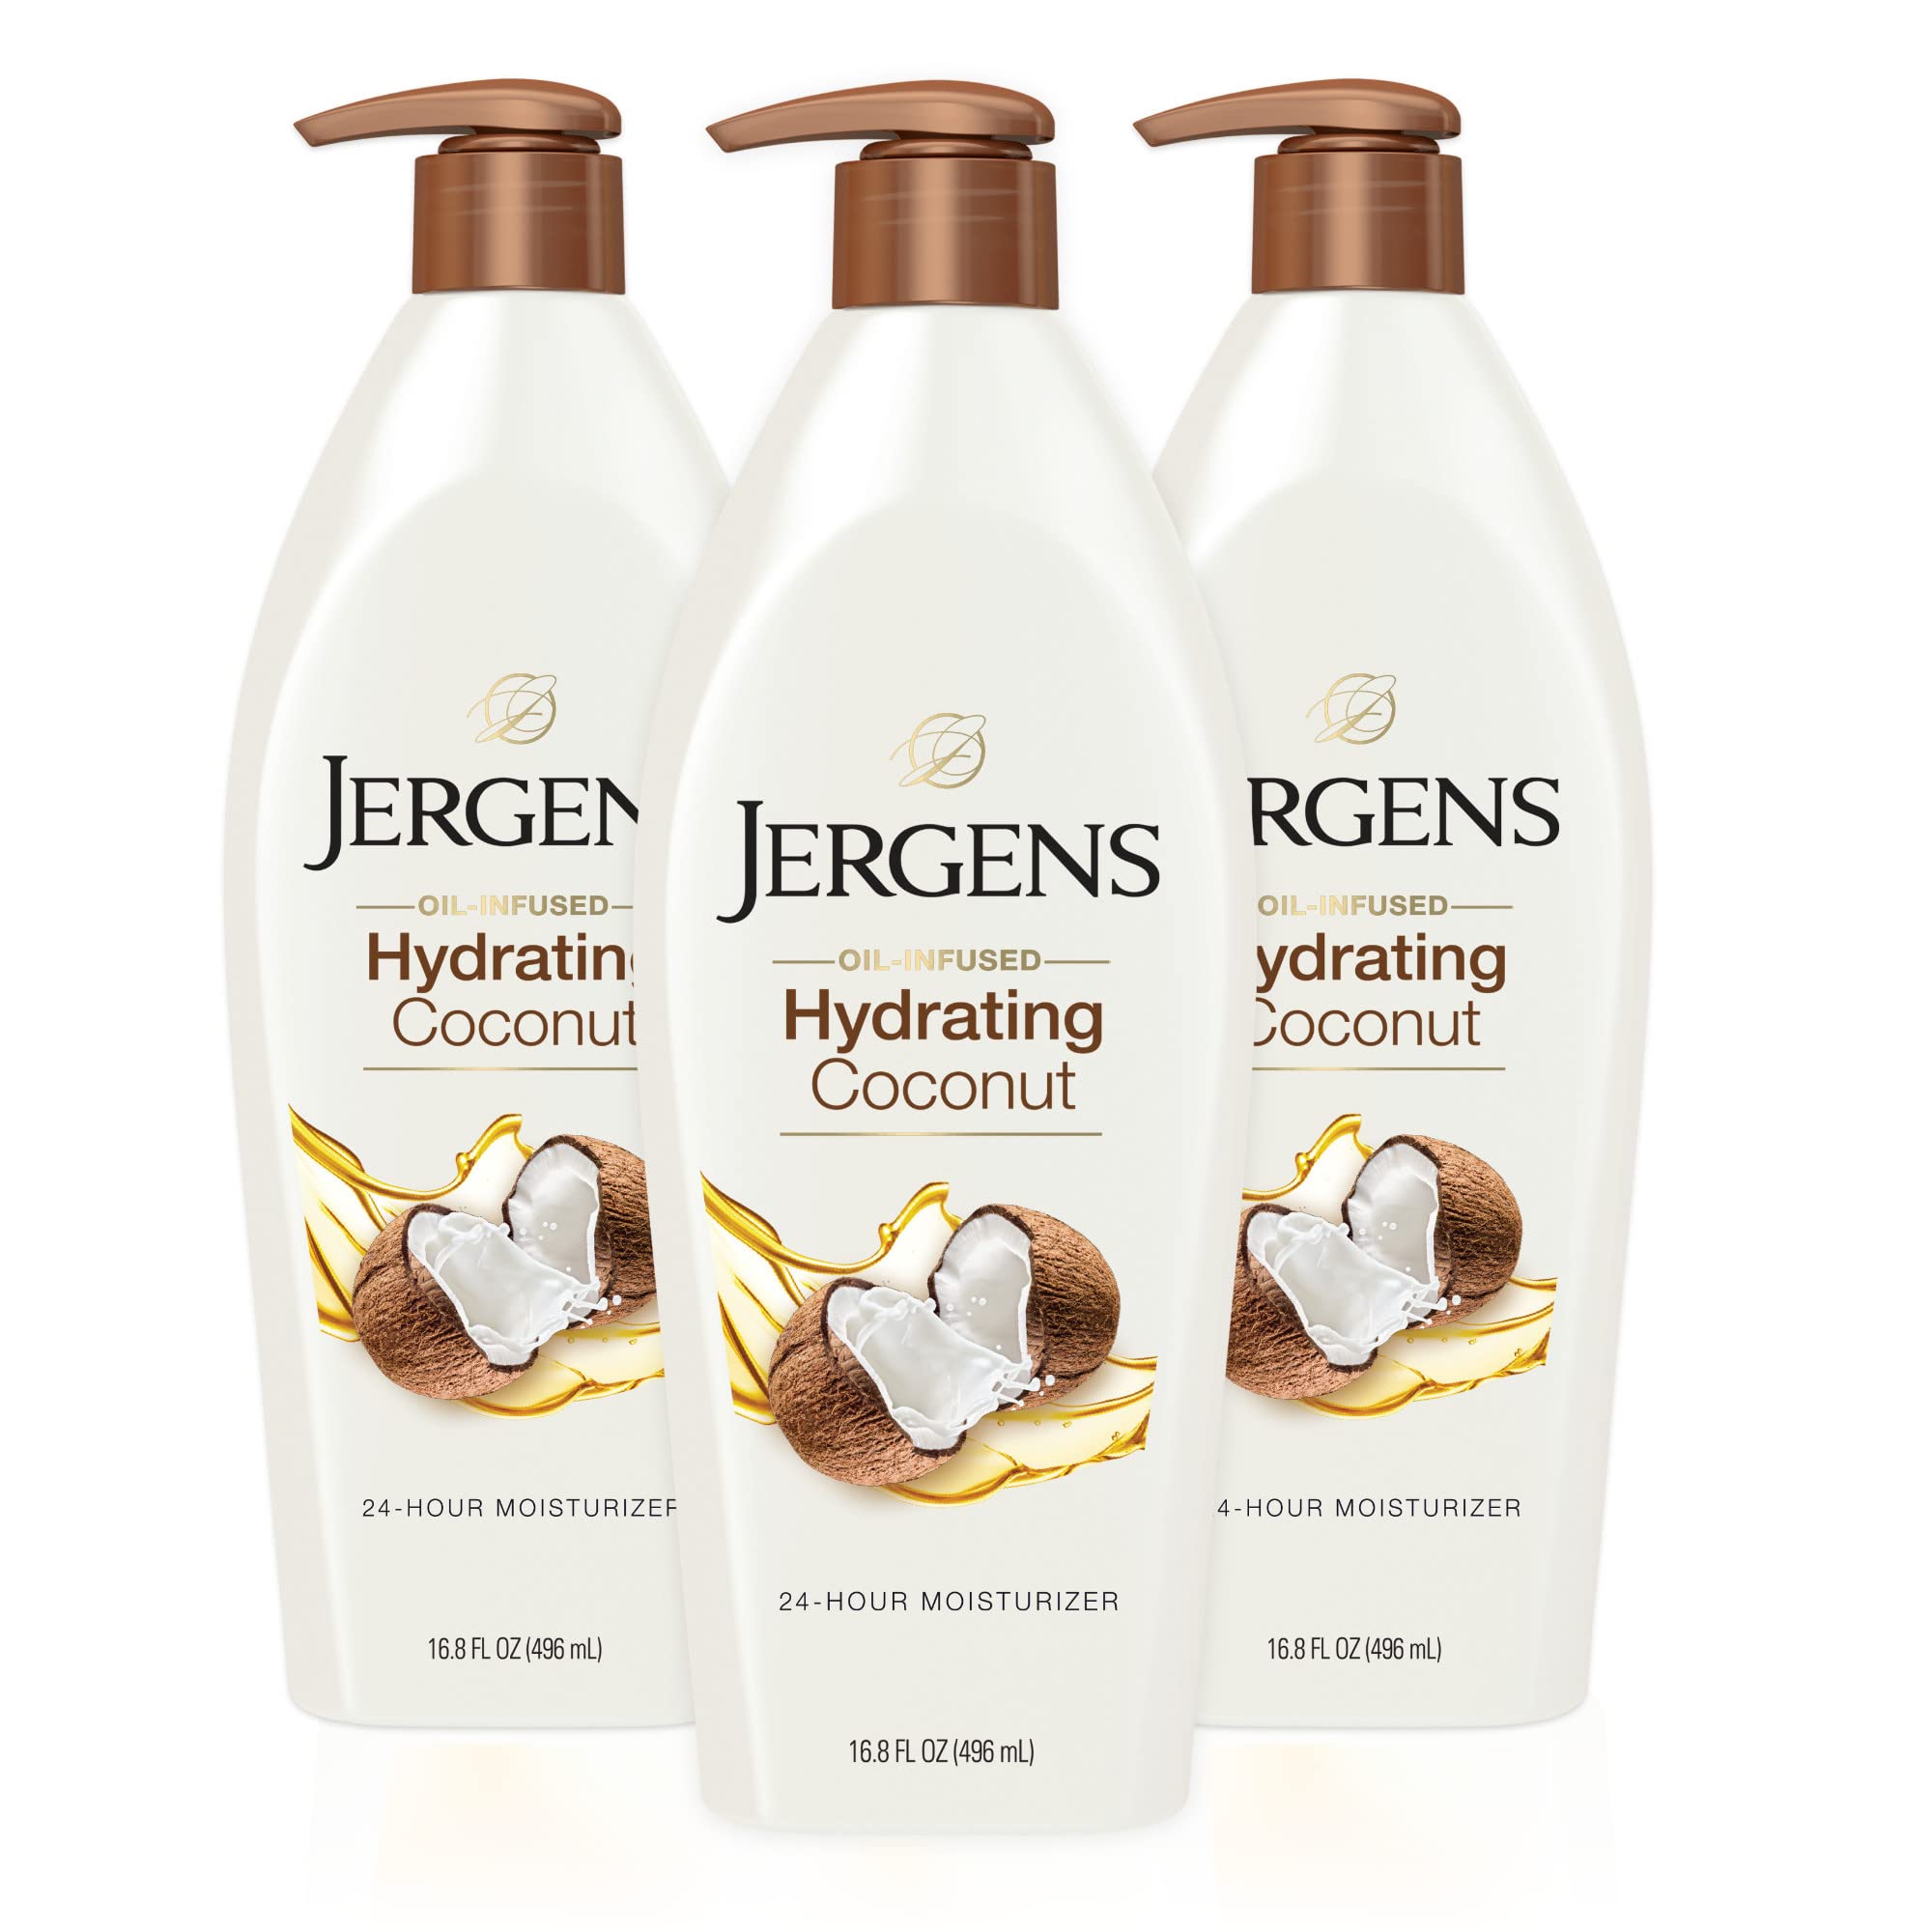 16.8-Oz Jergens Hydrating Coconut Hand & Body Lotion 3 for $9.60 ($3.20 each) w/ S&S + Free Shipping w/ Prime or on $35+